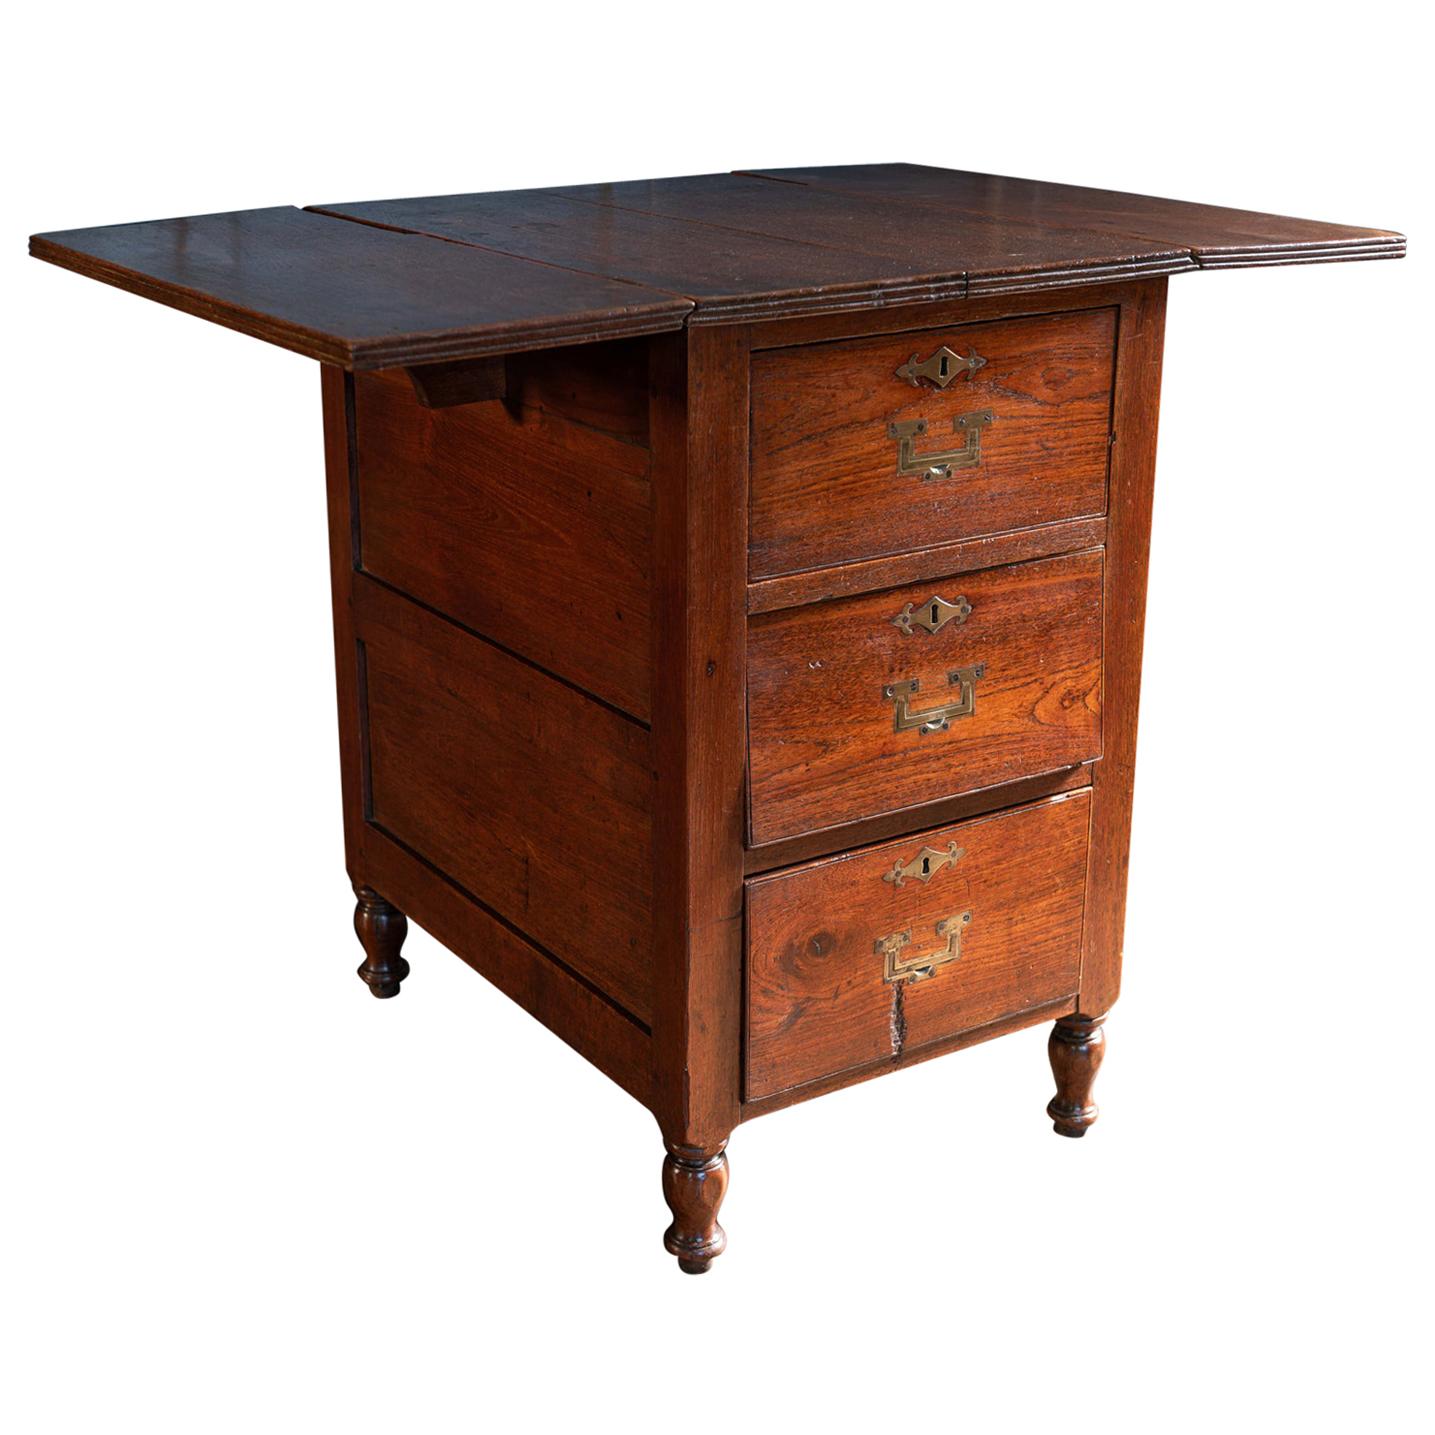 Mahogany and Teak Campaign Cabin Map Table/Chest, English, circa 1800